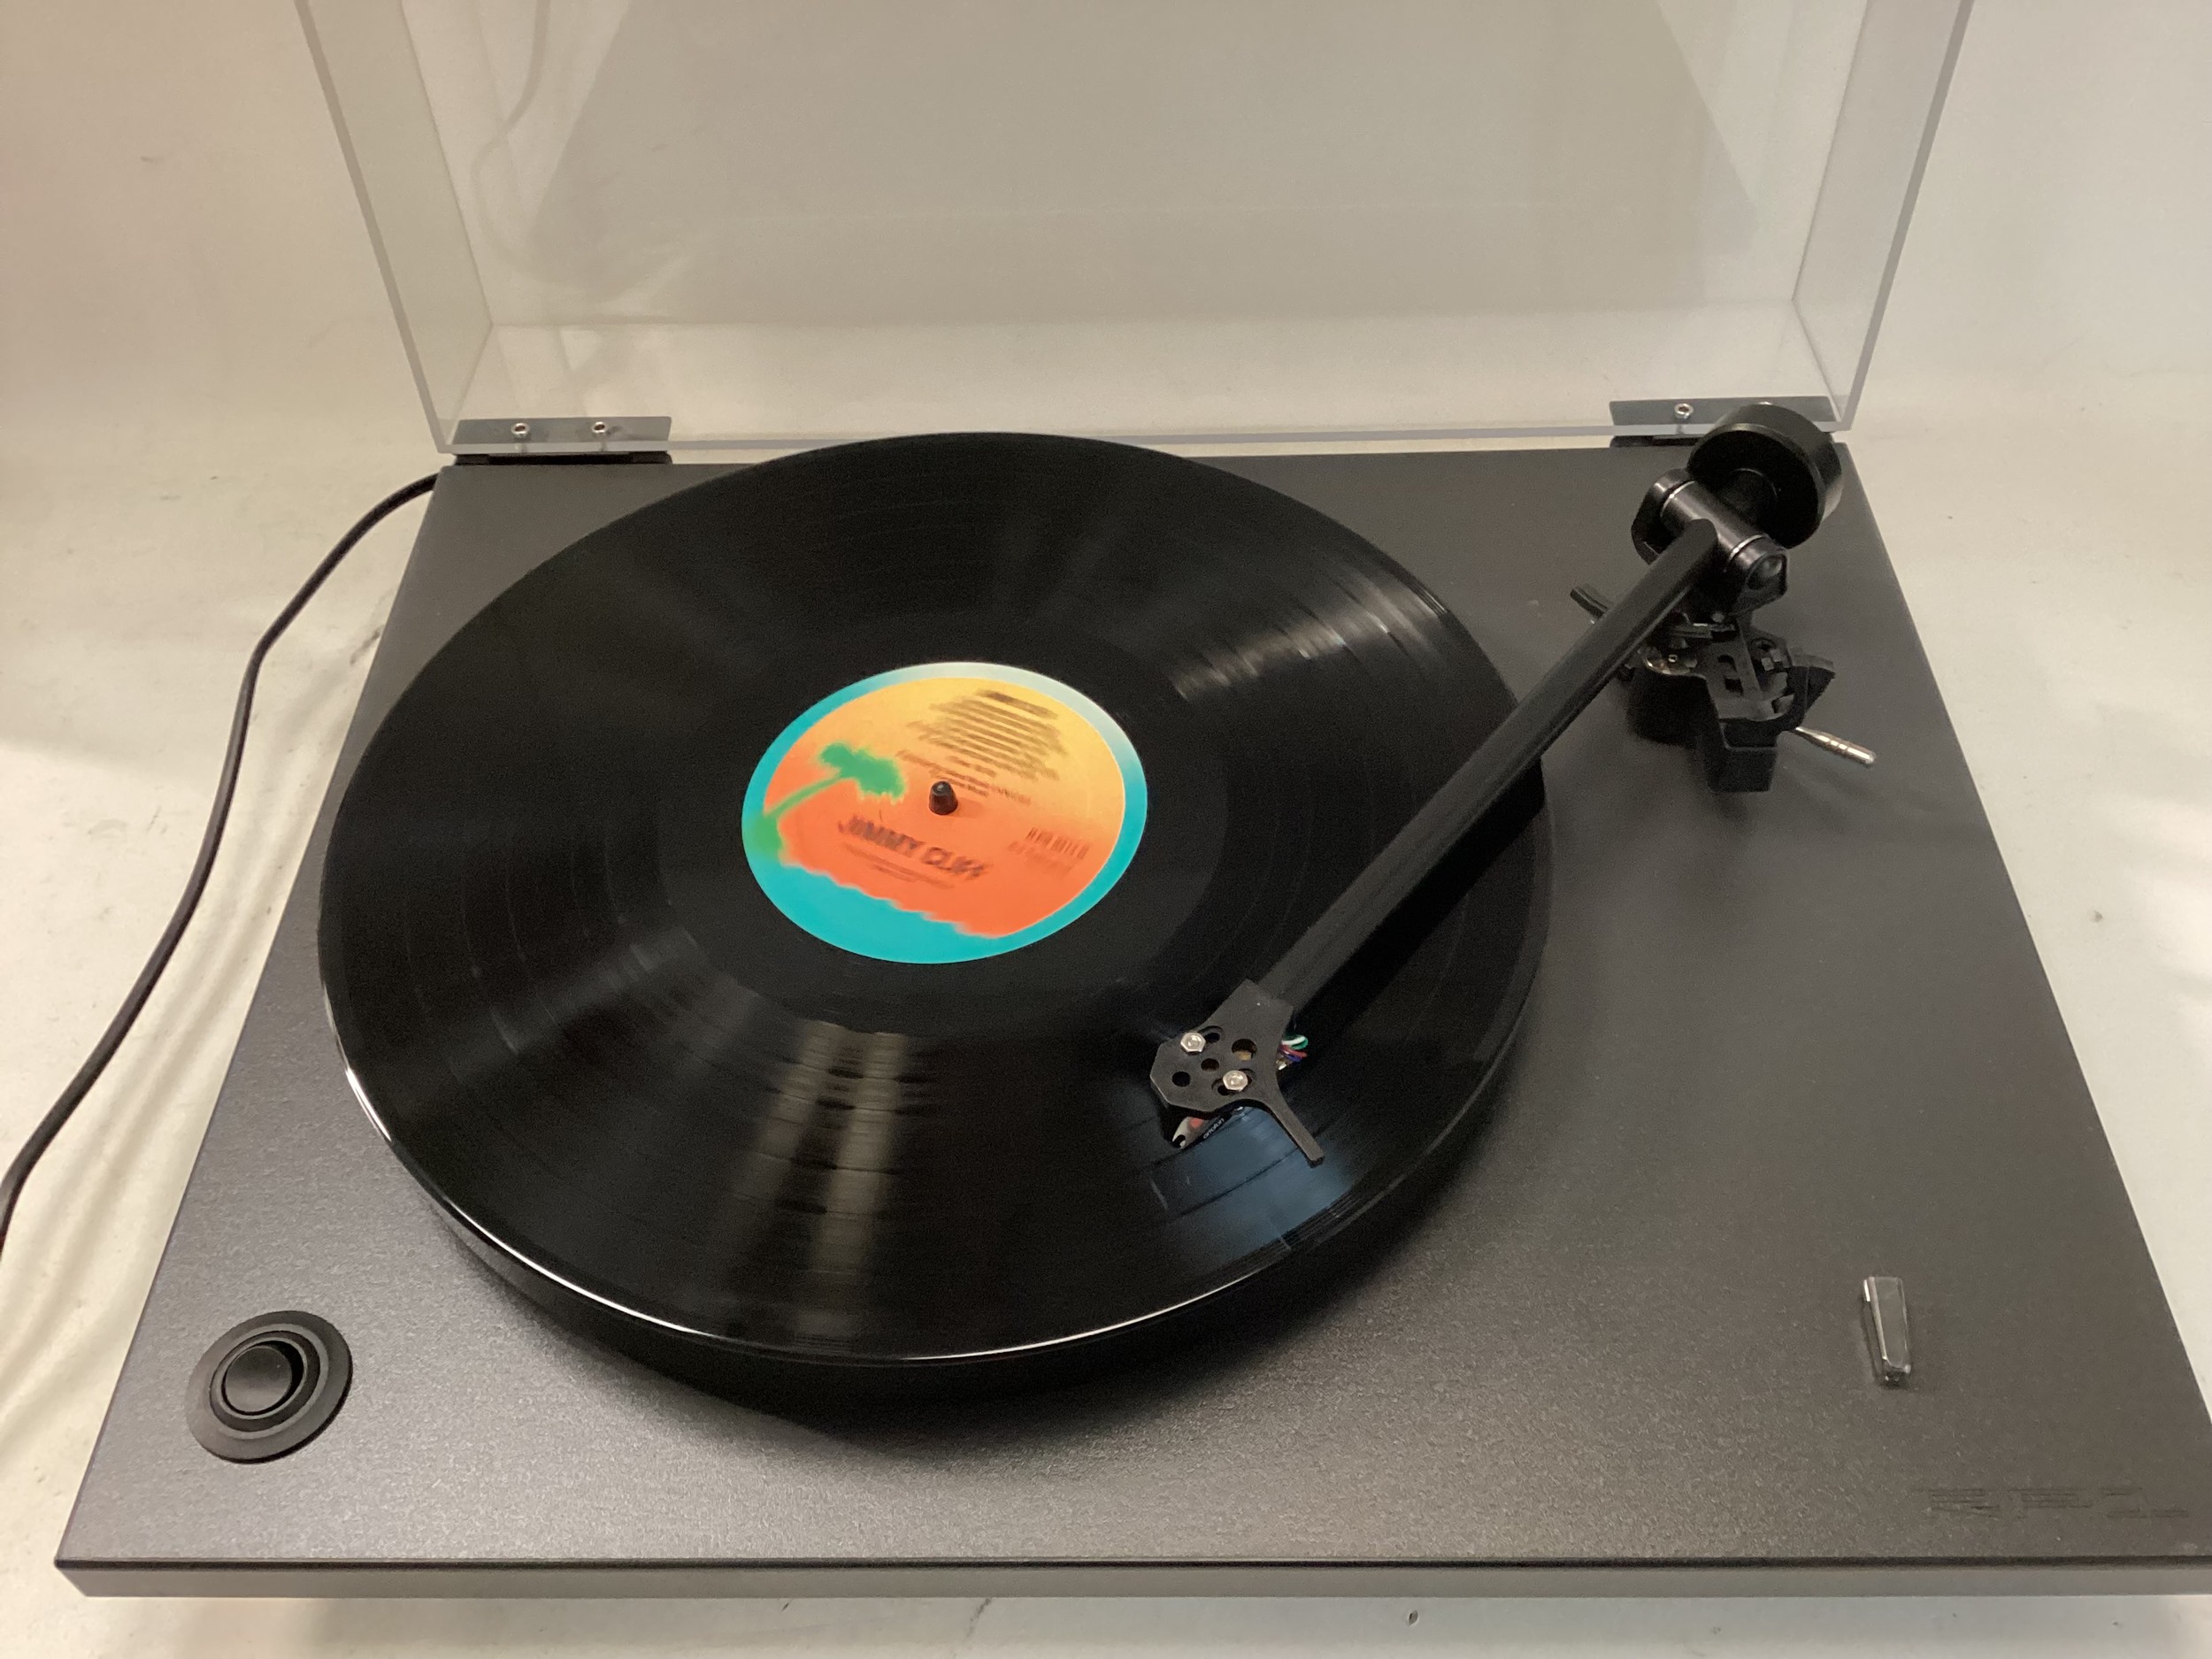 REGA STEREO TURNTABLE. This is a REGA RP 1 turntable and is 2 speed belt driven. The arm is REGA and